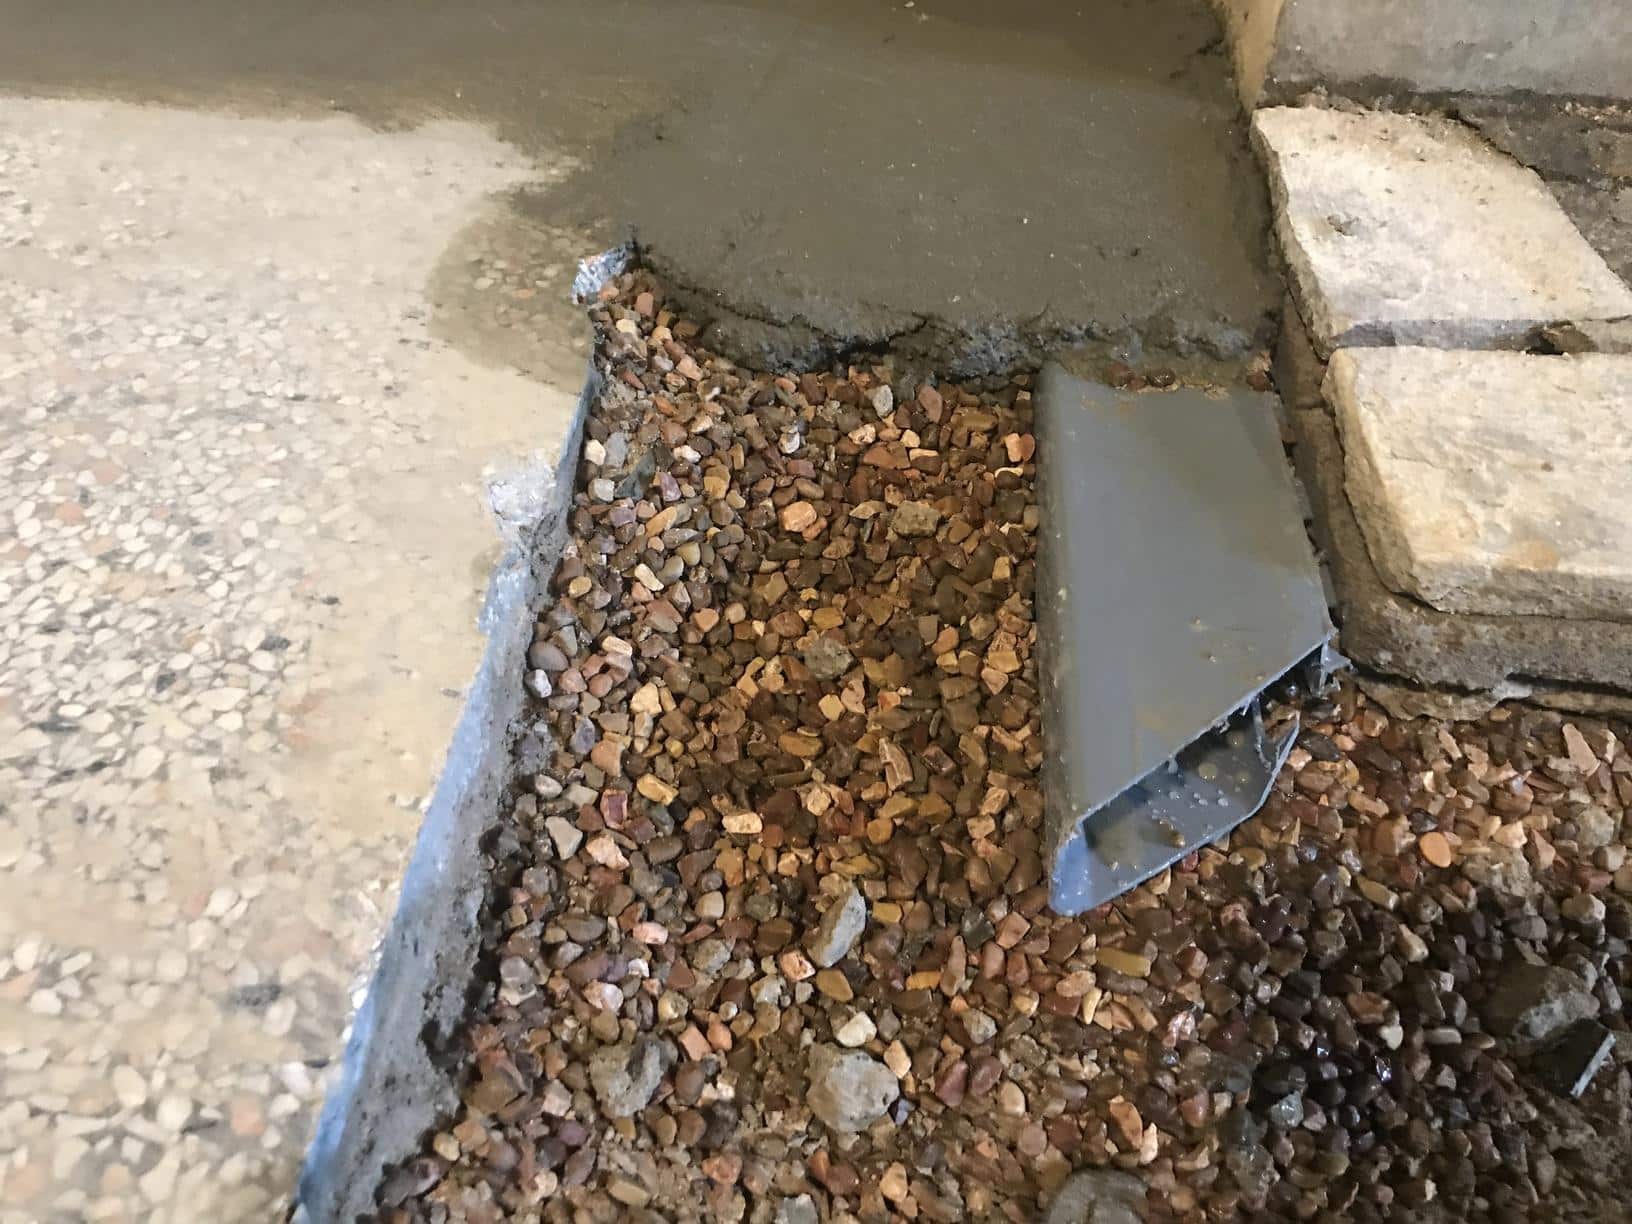 The Waterguard Drainage system is installed to drain water under your floor to the sump system. This lifetime warranted system is patented and can be installed year-round.